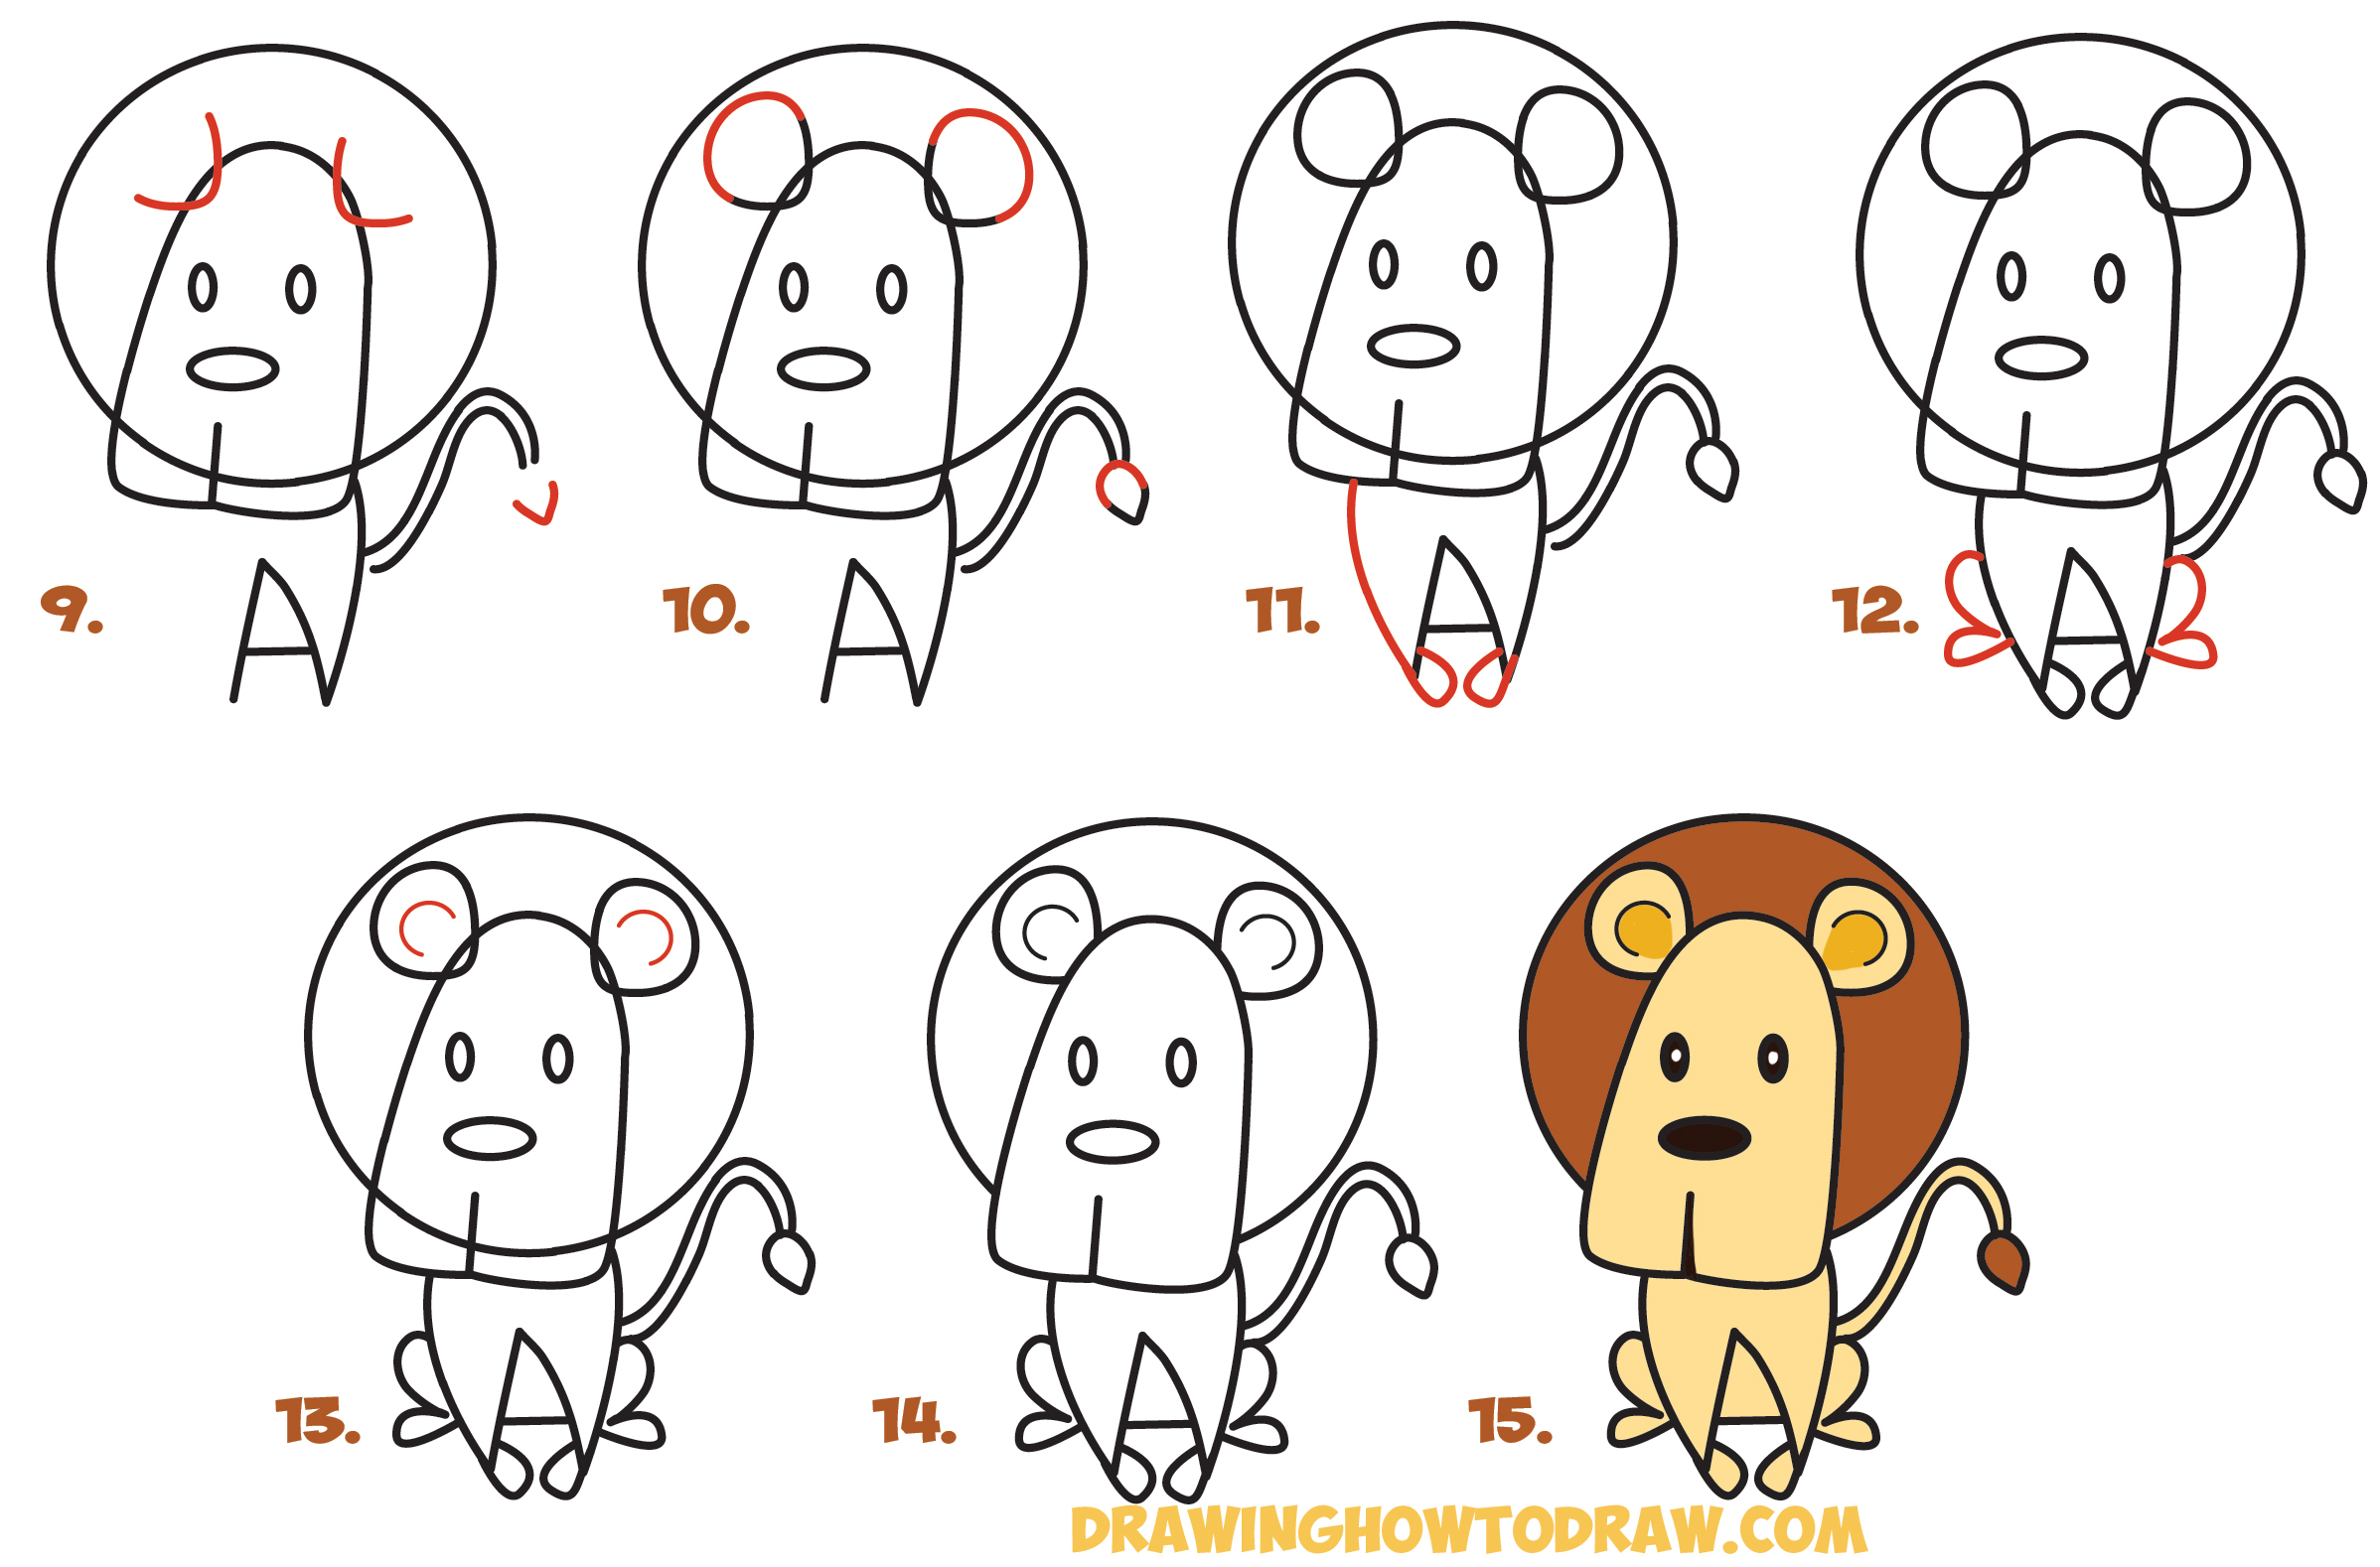 How to draw cartoon characters